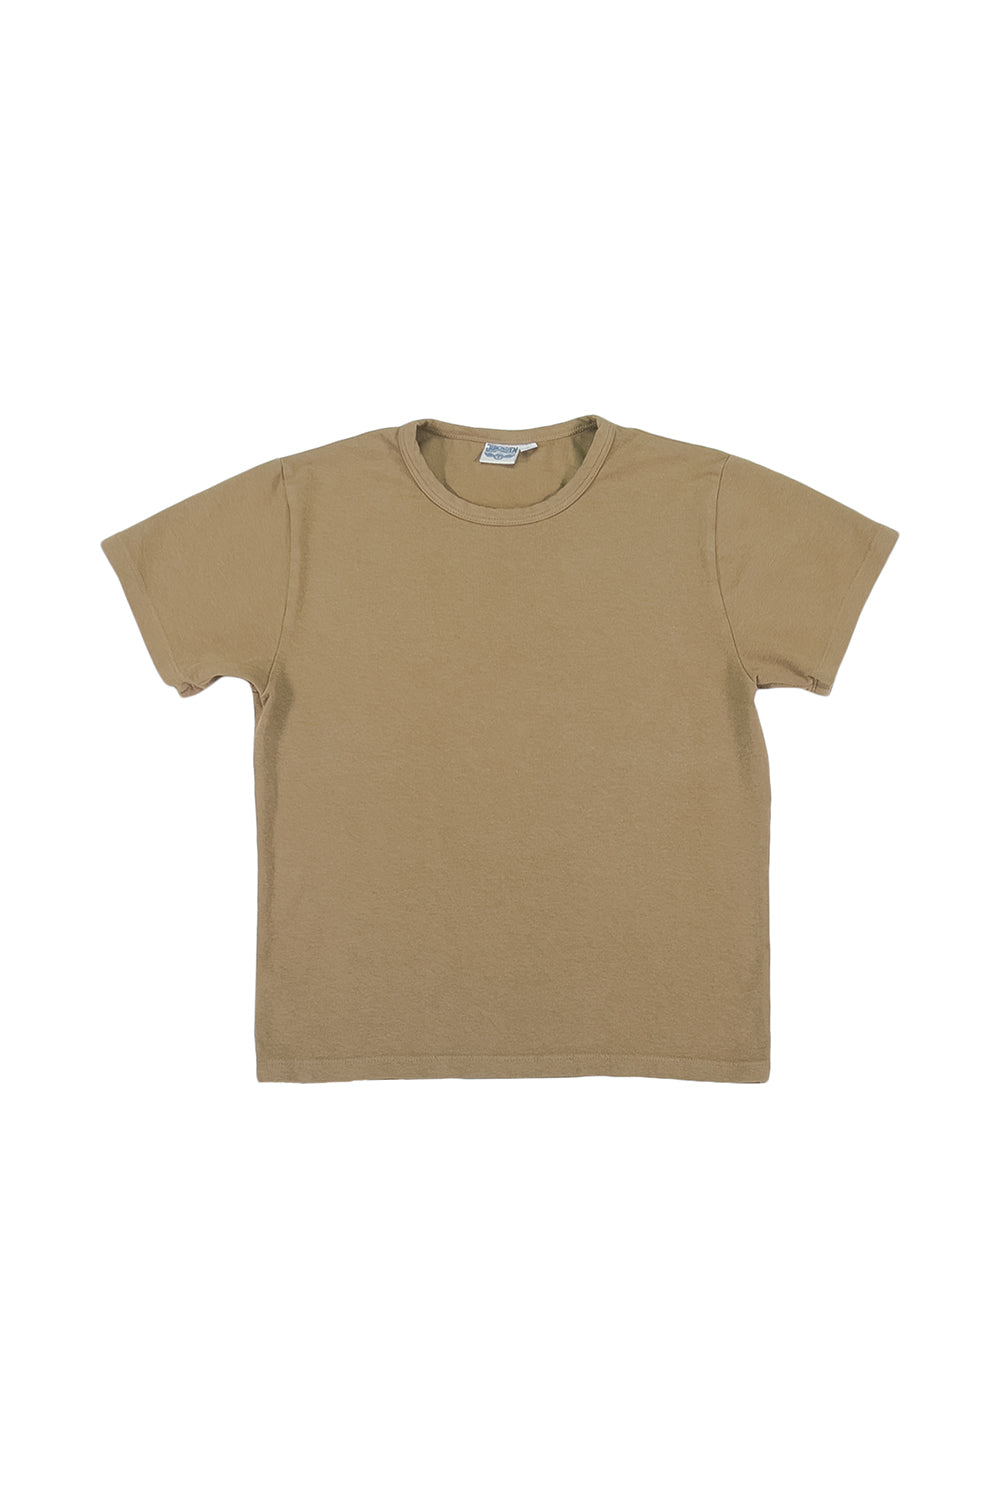 Tiny Tee | Jungmaven Hemp Clothing & Accessories / Color: Coyote